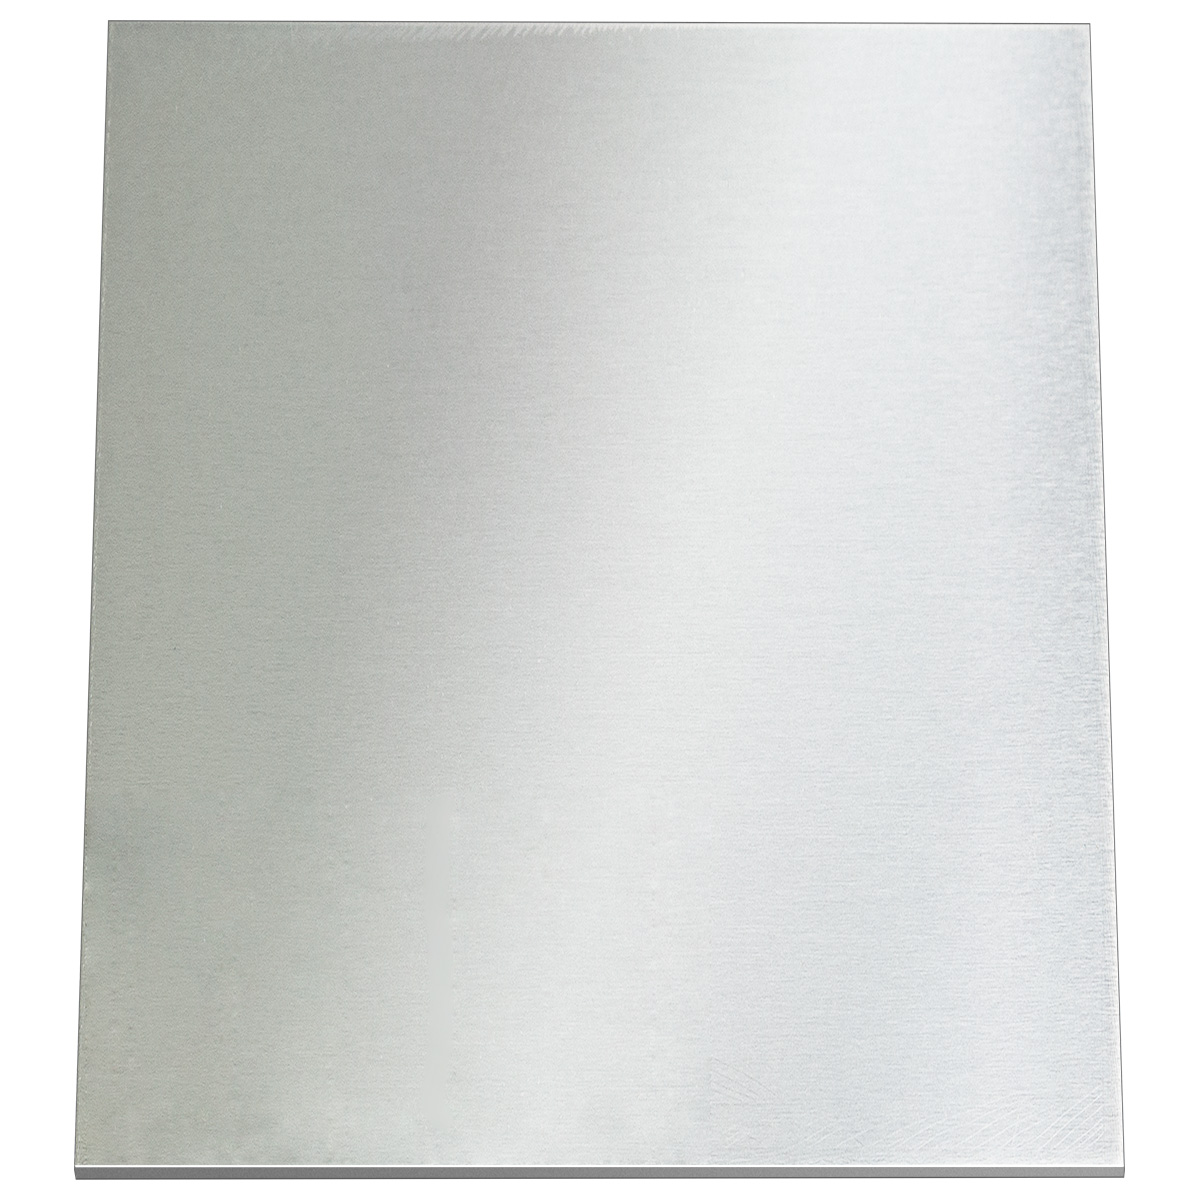 SALES PROMOTION Engraving plates aluminium rectangular 100 x 160 mm, 1 mm thick, without adhesive, without hole